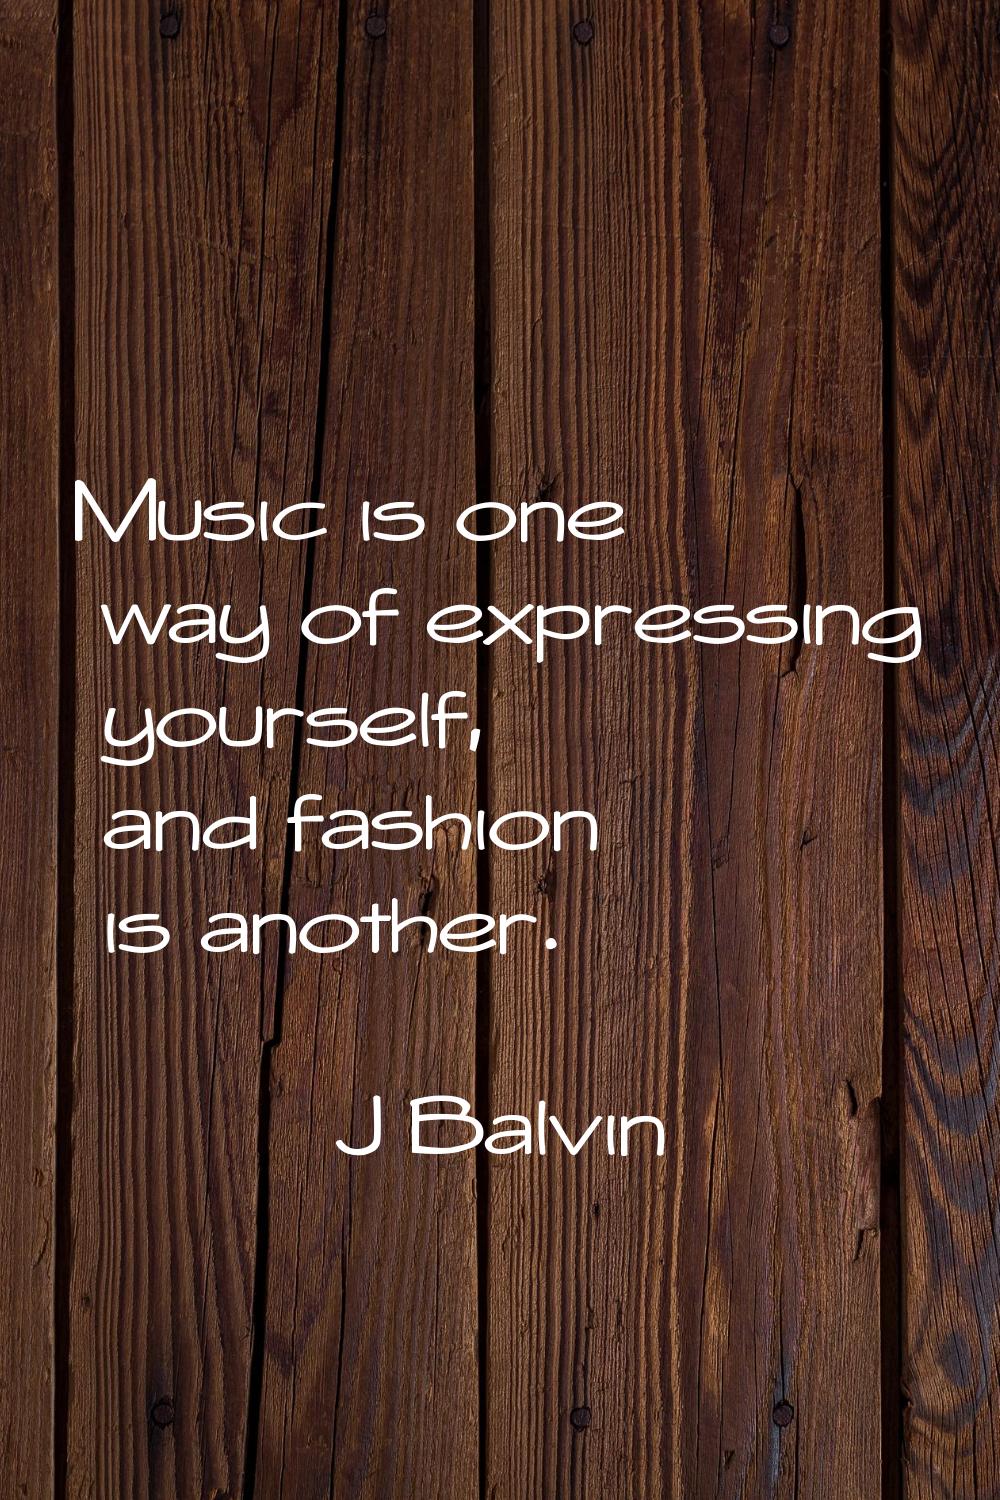 Music is one way of expressing yourself, and fashion is another.